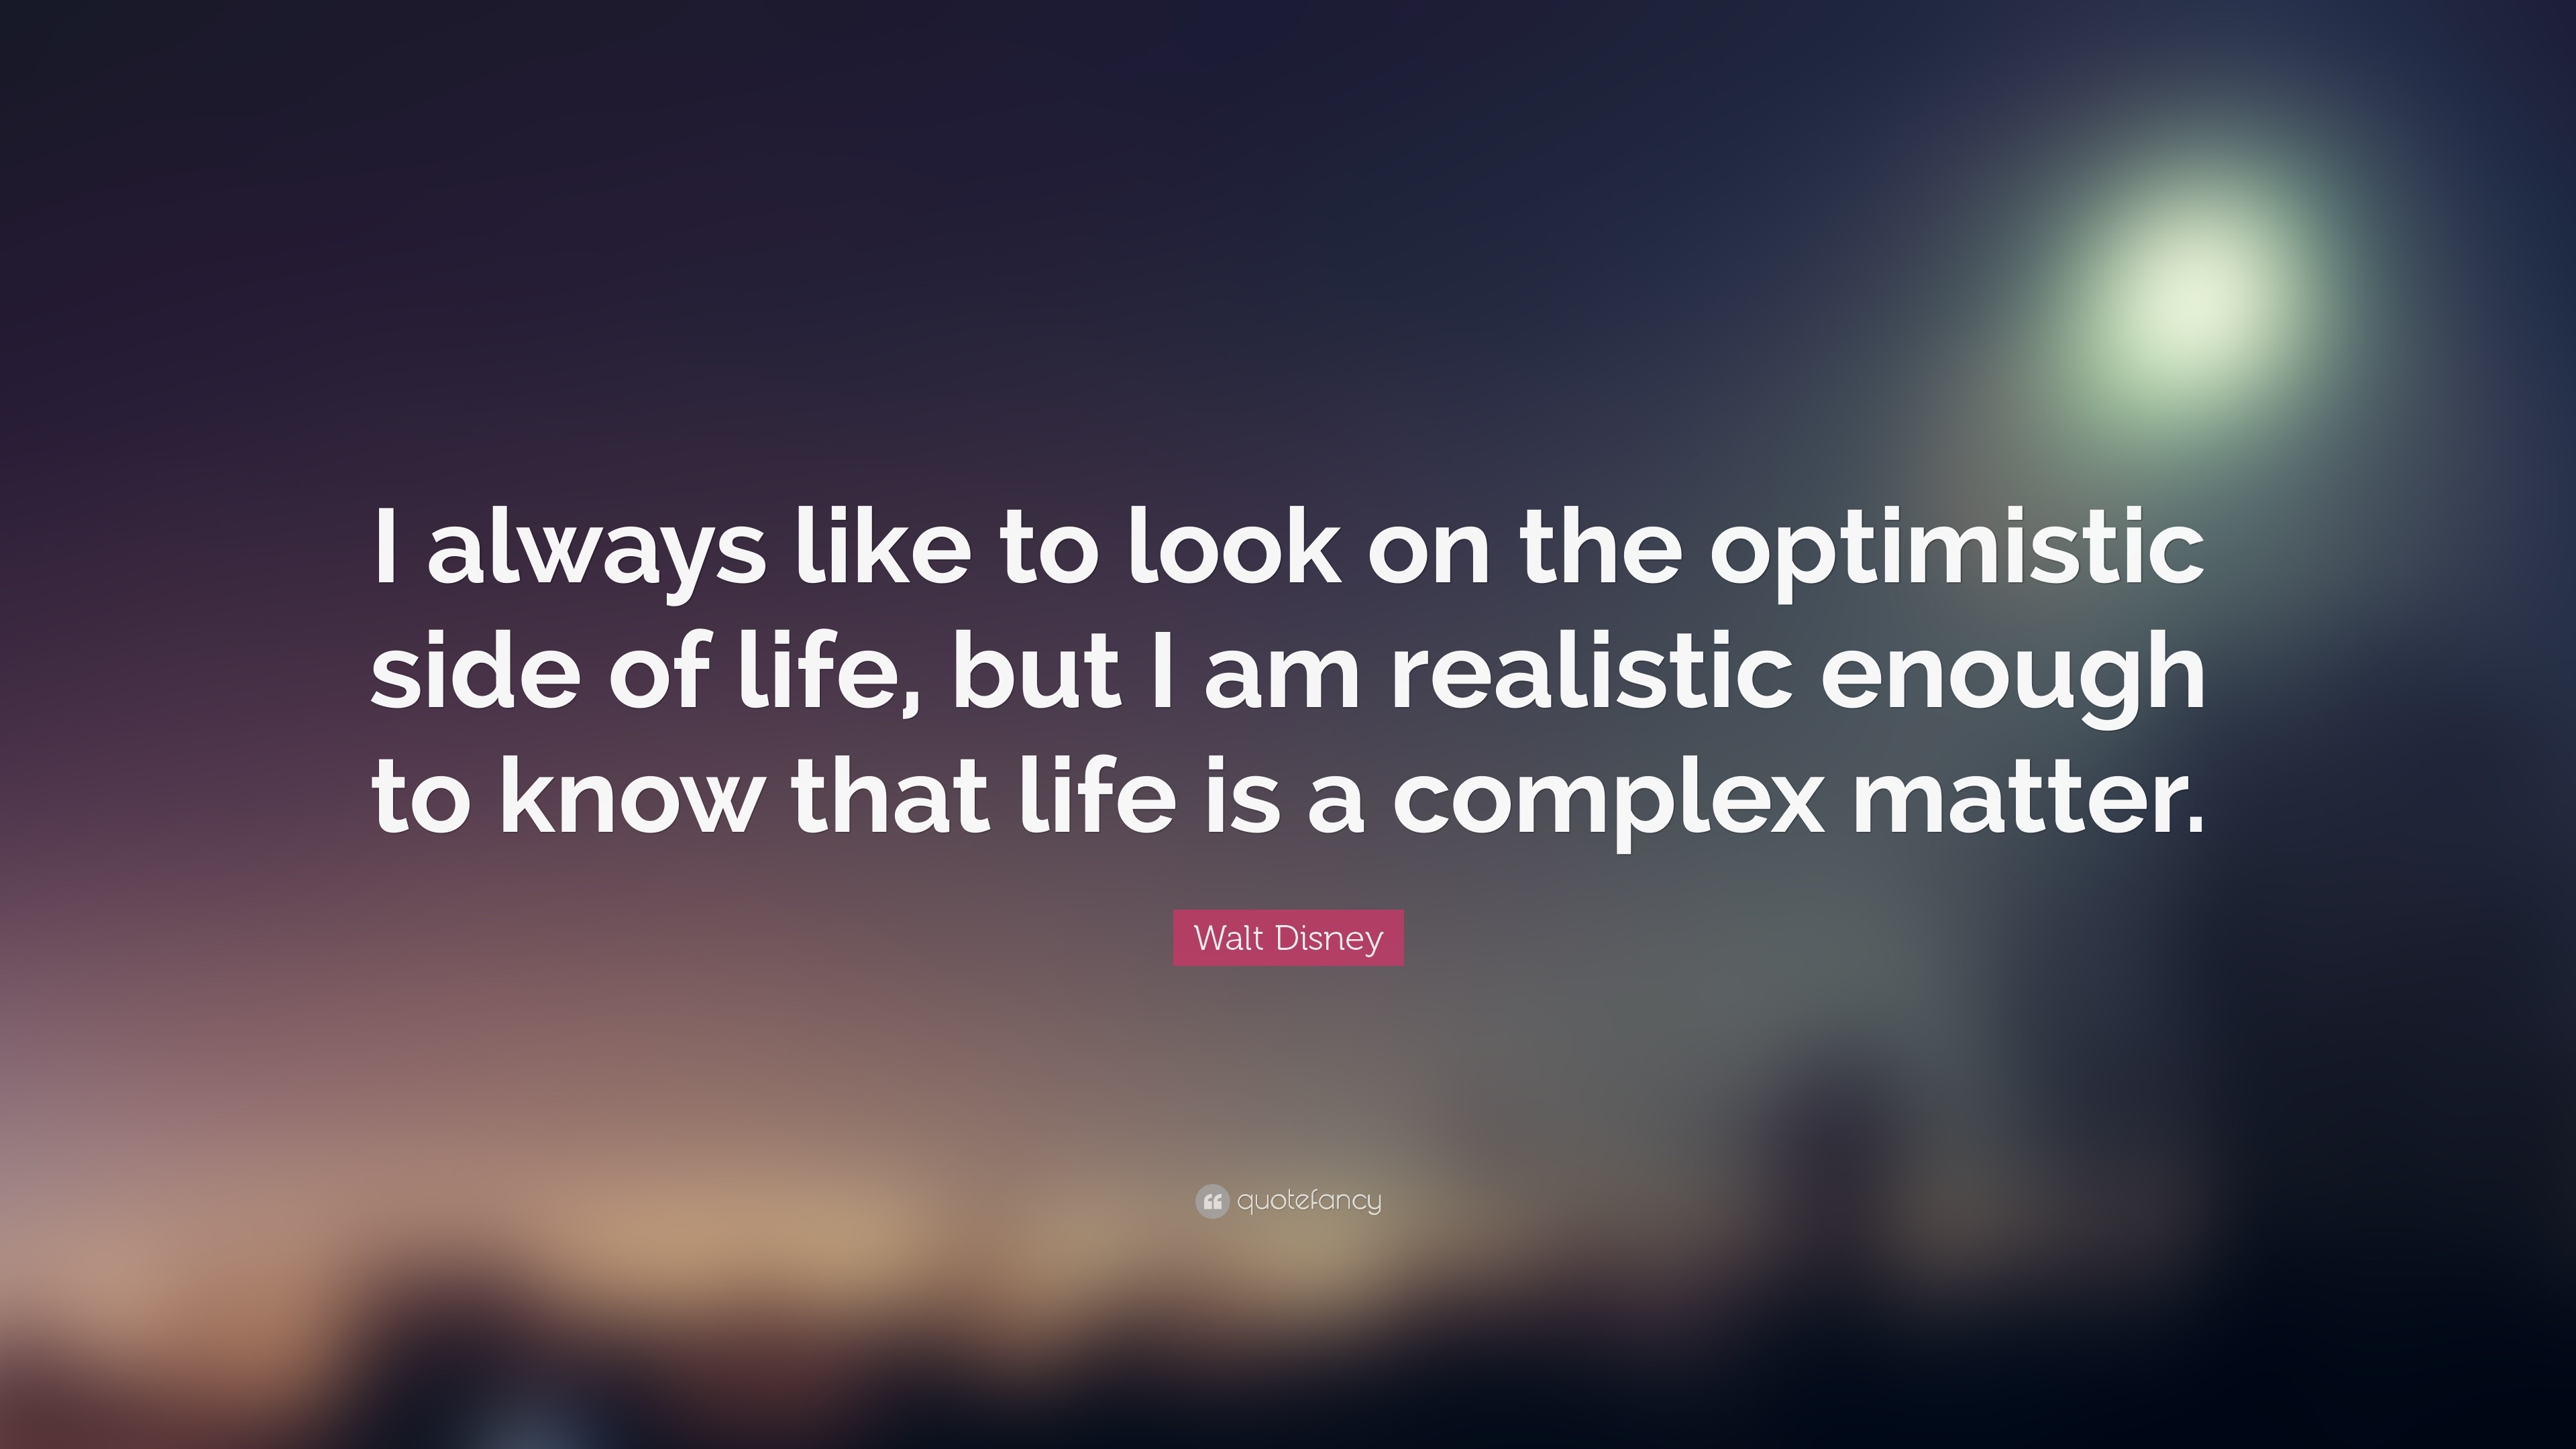 3840x2160 Walt Disney Quote: “I always like to look on the optimistic side of life